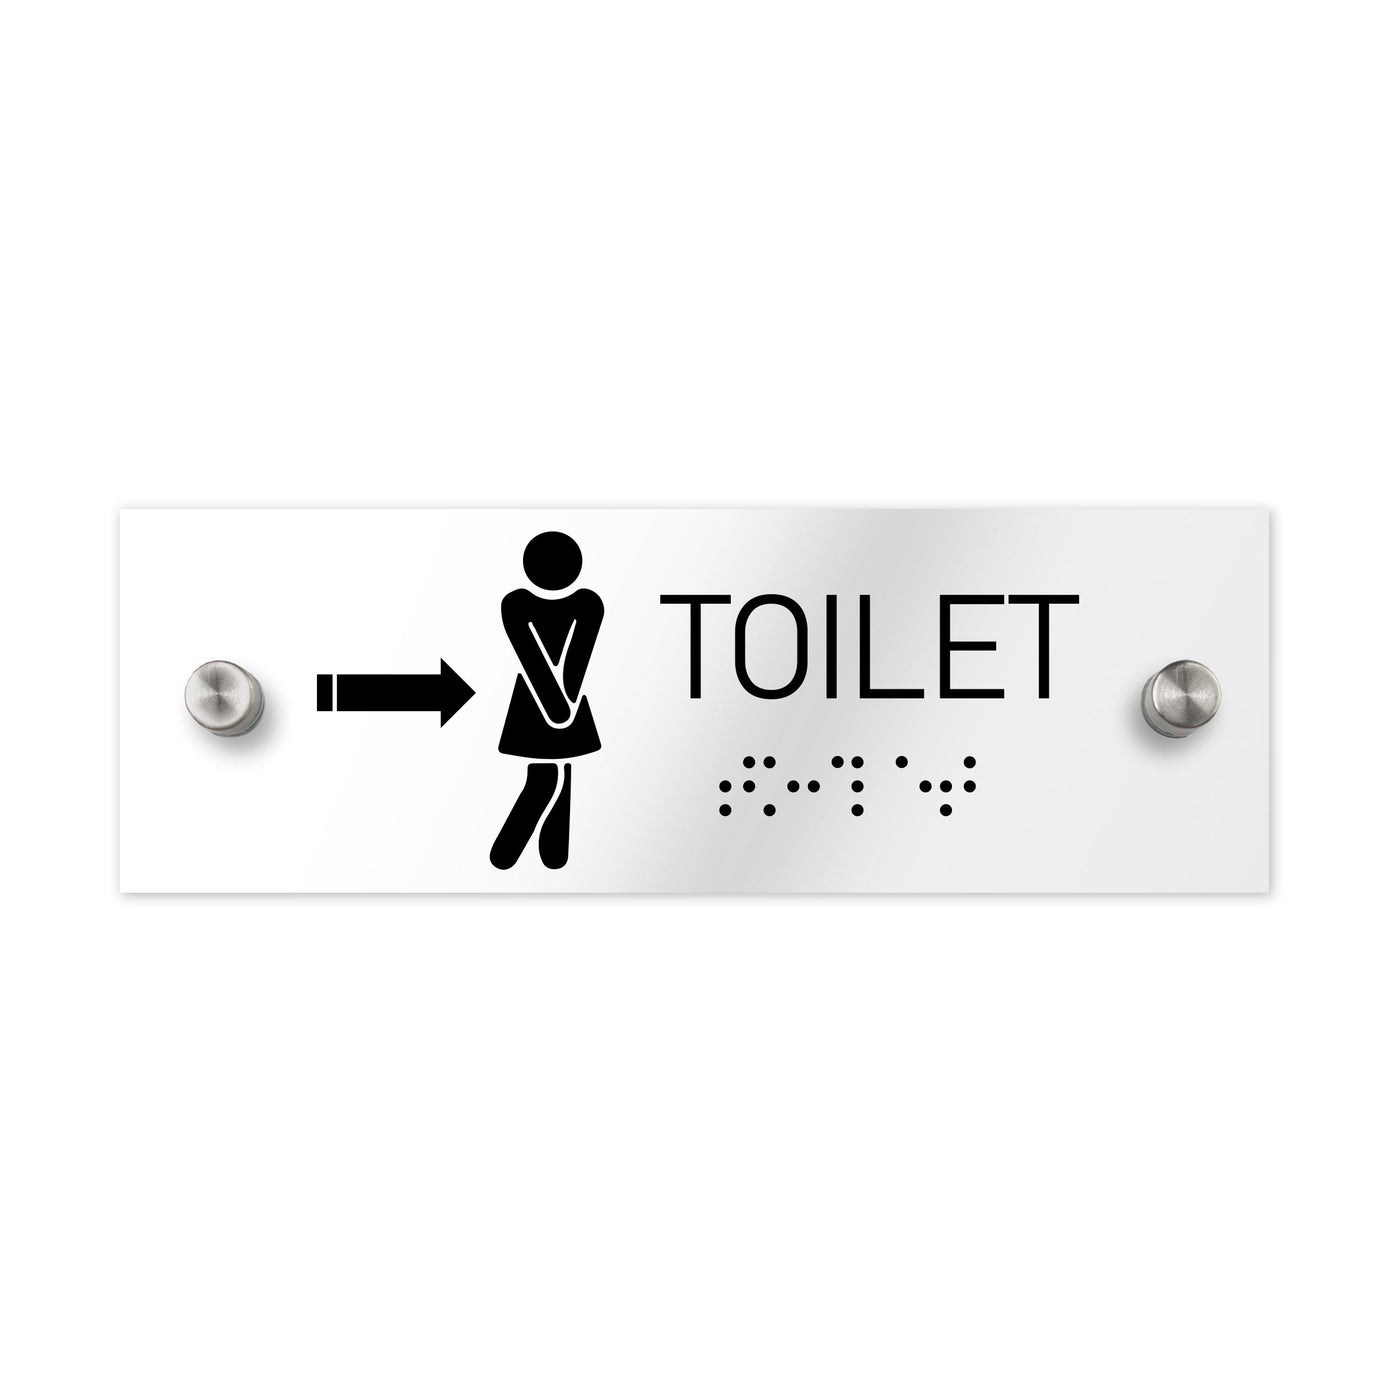 Bathroom Signs - Women Toilet ADA Signs With Braille - Clear Acrylic